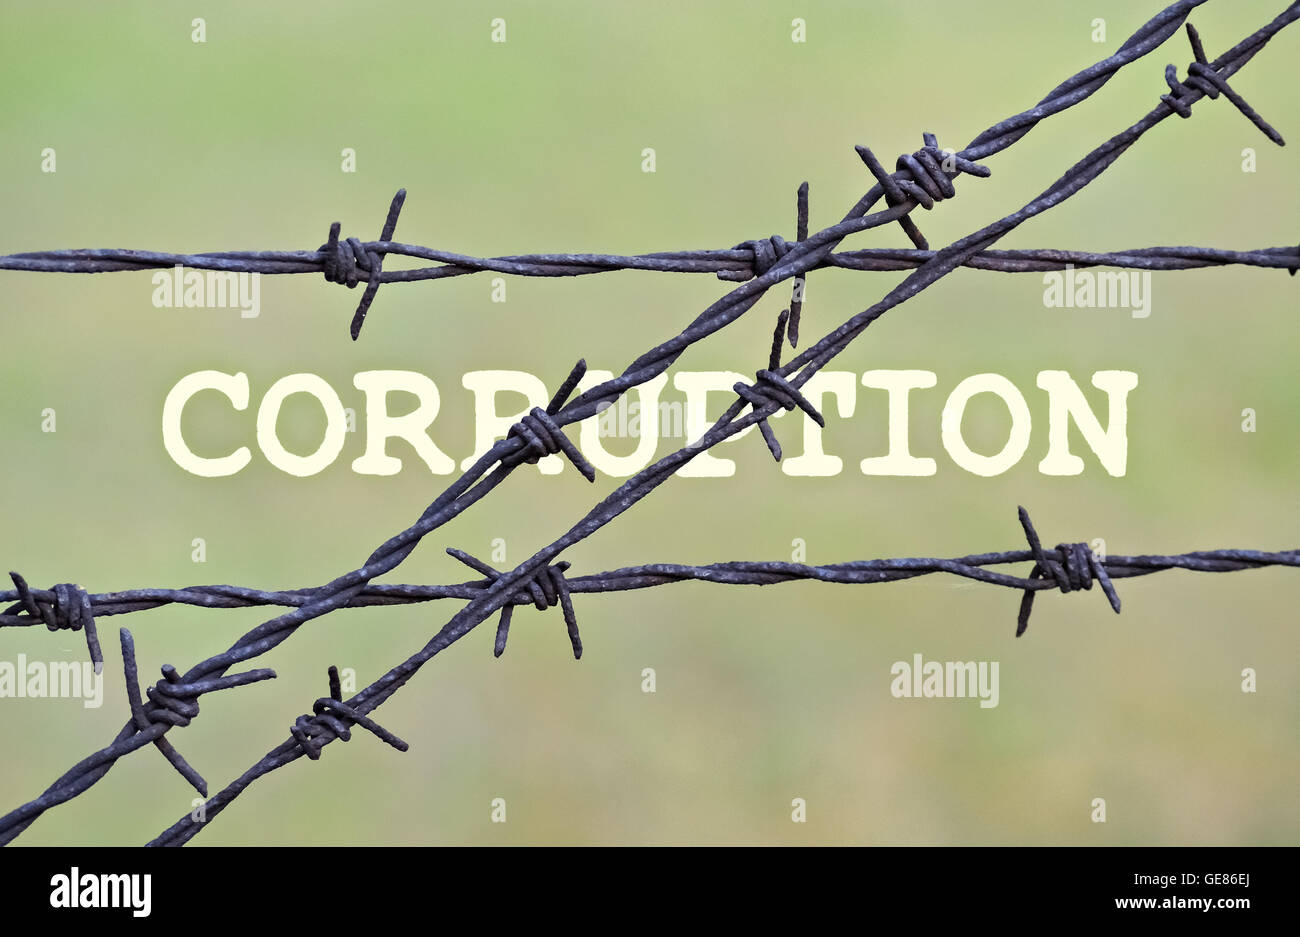 Word Corruption written under a wire fence with barbs Stock Photo